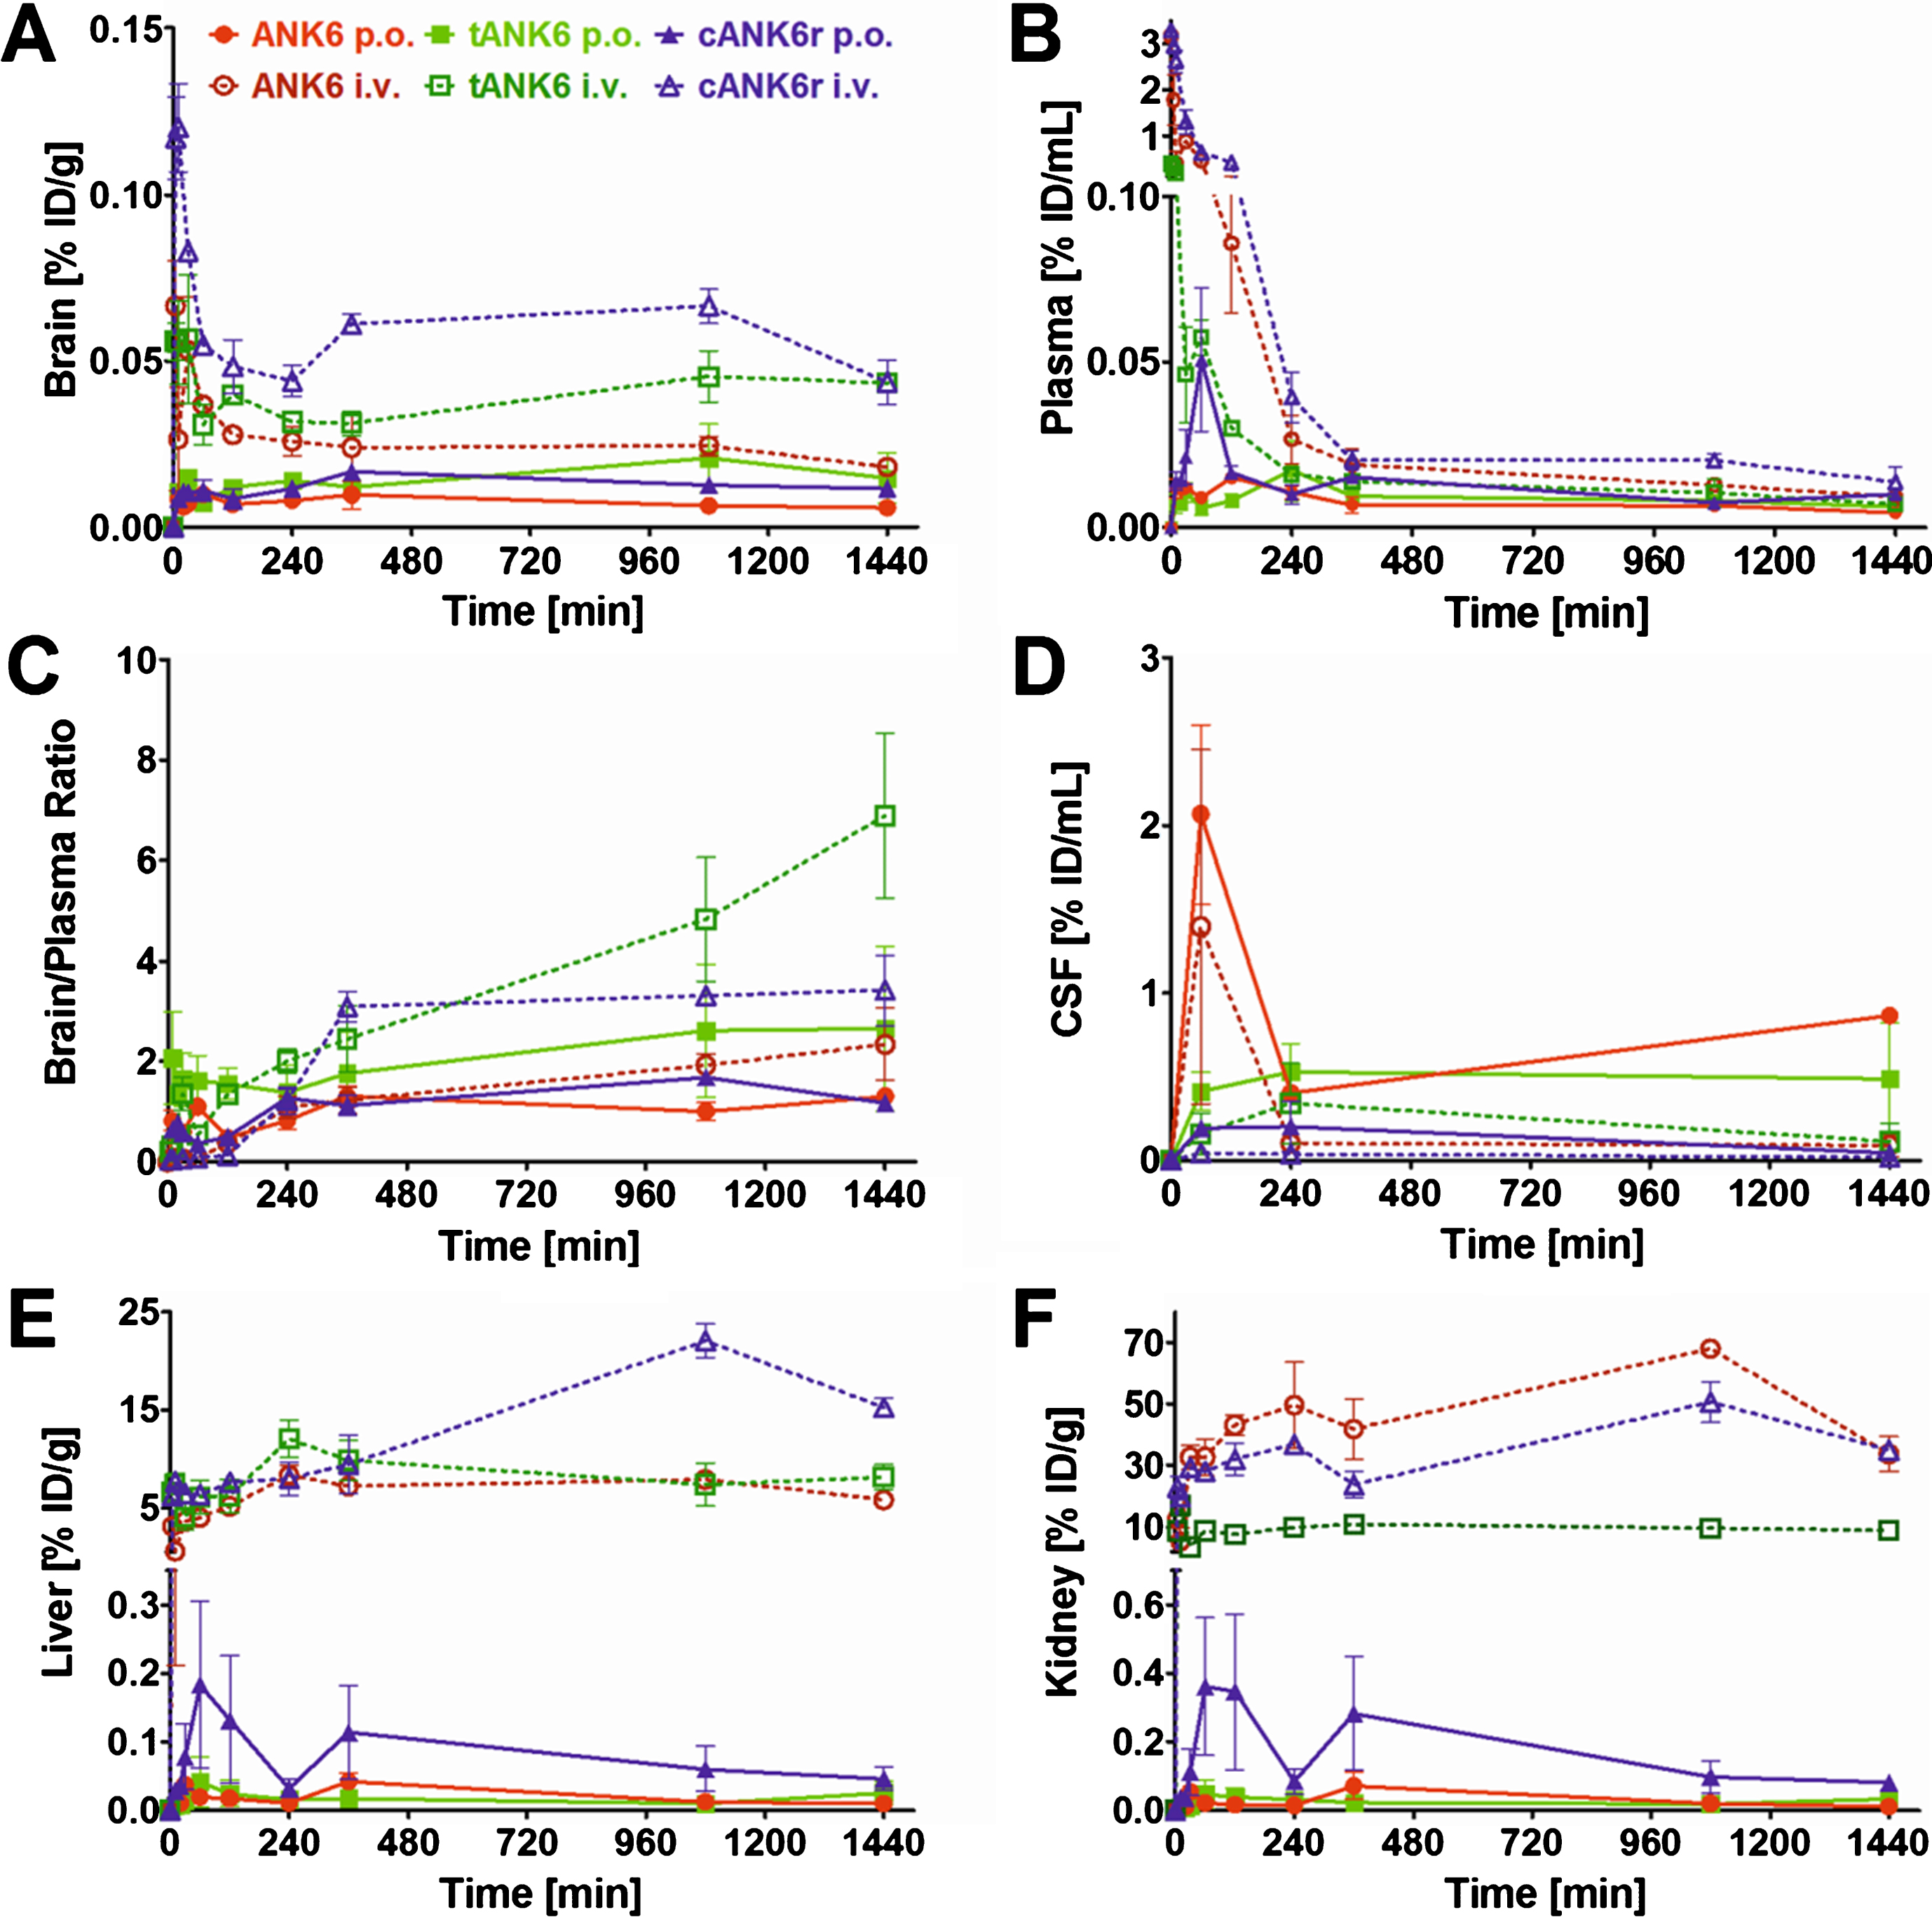 Pharmacokinetic concentration-time profiles of ANK6, tANK6, and cANK6r. Pharmacokinetic concentration-time profiles of ANK6 (red circles), tANK6 (green squares), and cANK6r (blue triangles) were investigated in brain (A), plasma (B), CSF (D), liver (E), and kidney (F) after i.v. (3.3 mg/kg, dotted lines) and p.o. (10 mg/kg ANK6 & tANK6, 15 mg/kg cANK6r, continuous lines) administration to wild type mice (3 mice/time point). The D-peptides were administered as a mixture of 3H-labelled and non-labelled peptide in 0.9% sodium chloride solution. The 3H-peptides’ concentrations (triplicate) in the respective organs, CSF, and plasma were measured with liquid scintillation counting. Total peptide concentrations were calculated as % of the injected dose per g or mL (% ID/g for brain, liver, kidney; % ID/mL for plasma, CSF) and plotted over time. The brain and plasma concentrations were set in relation to each other and plotted against the time as the brain/plasma ratio (C).